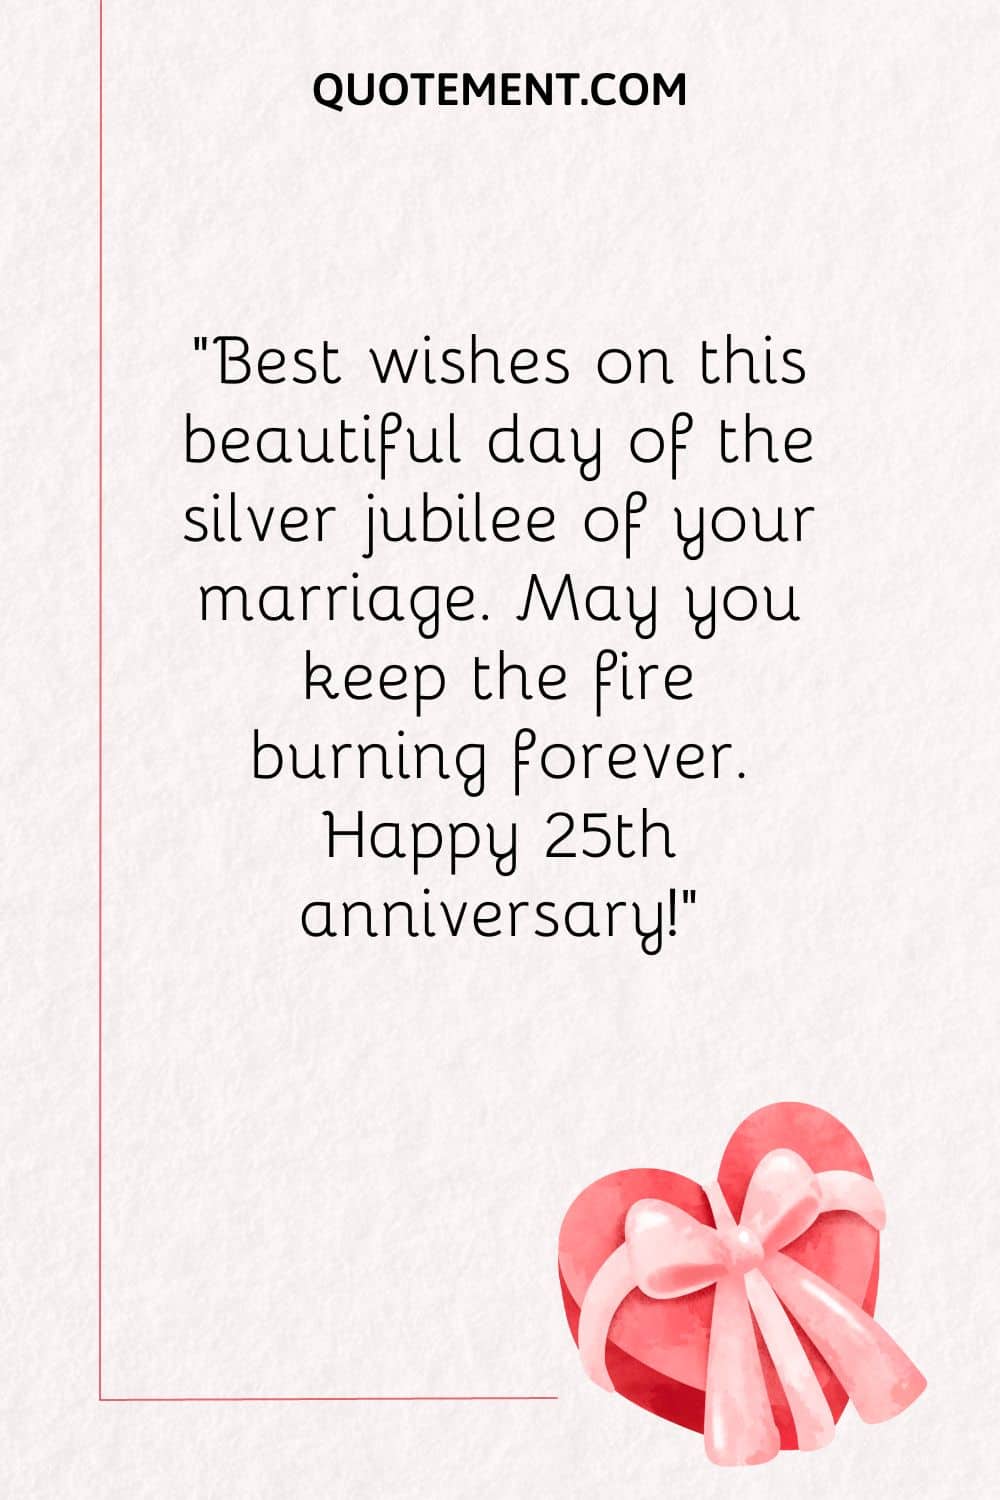 Best wishes on this beautiful day of the silver jubilee of your marriage